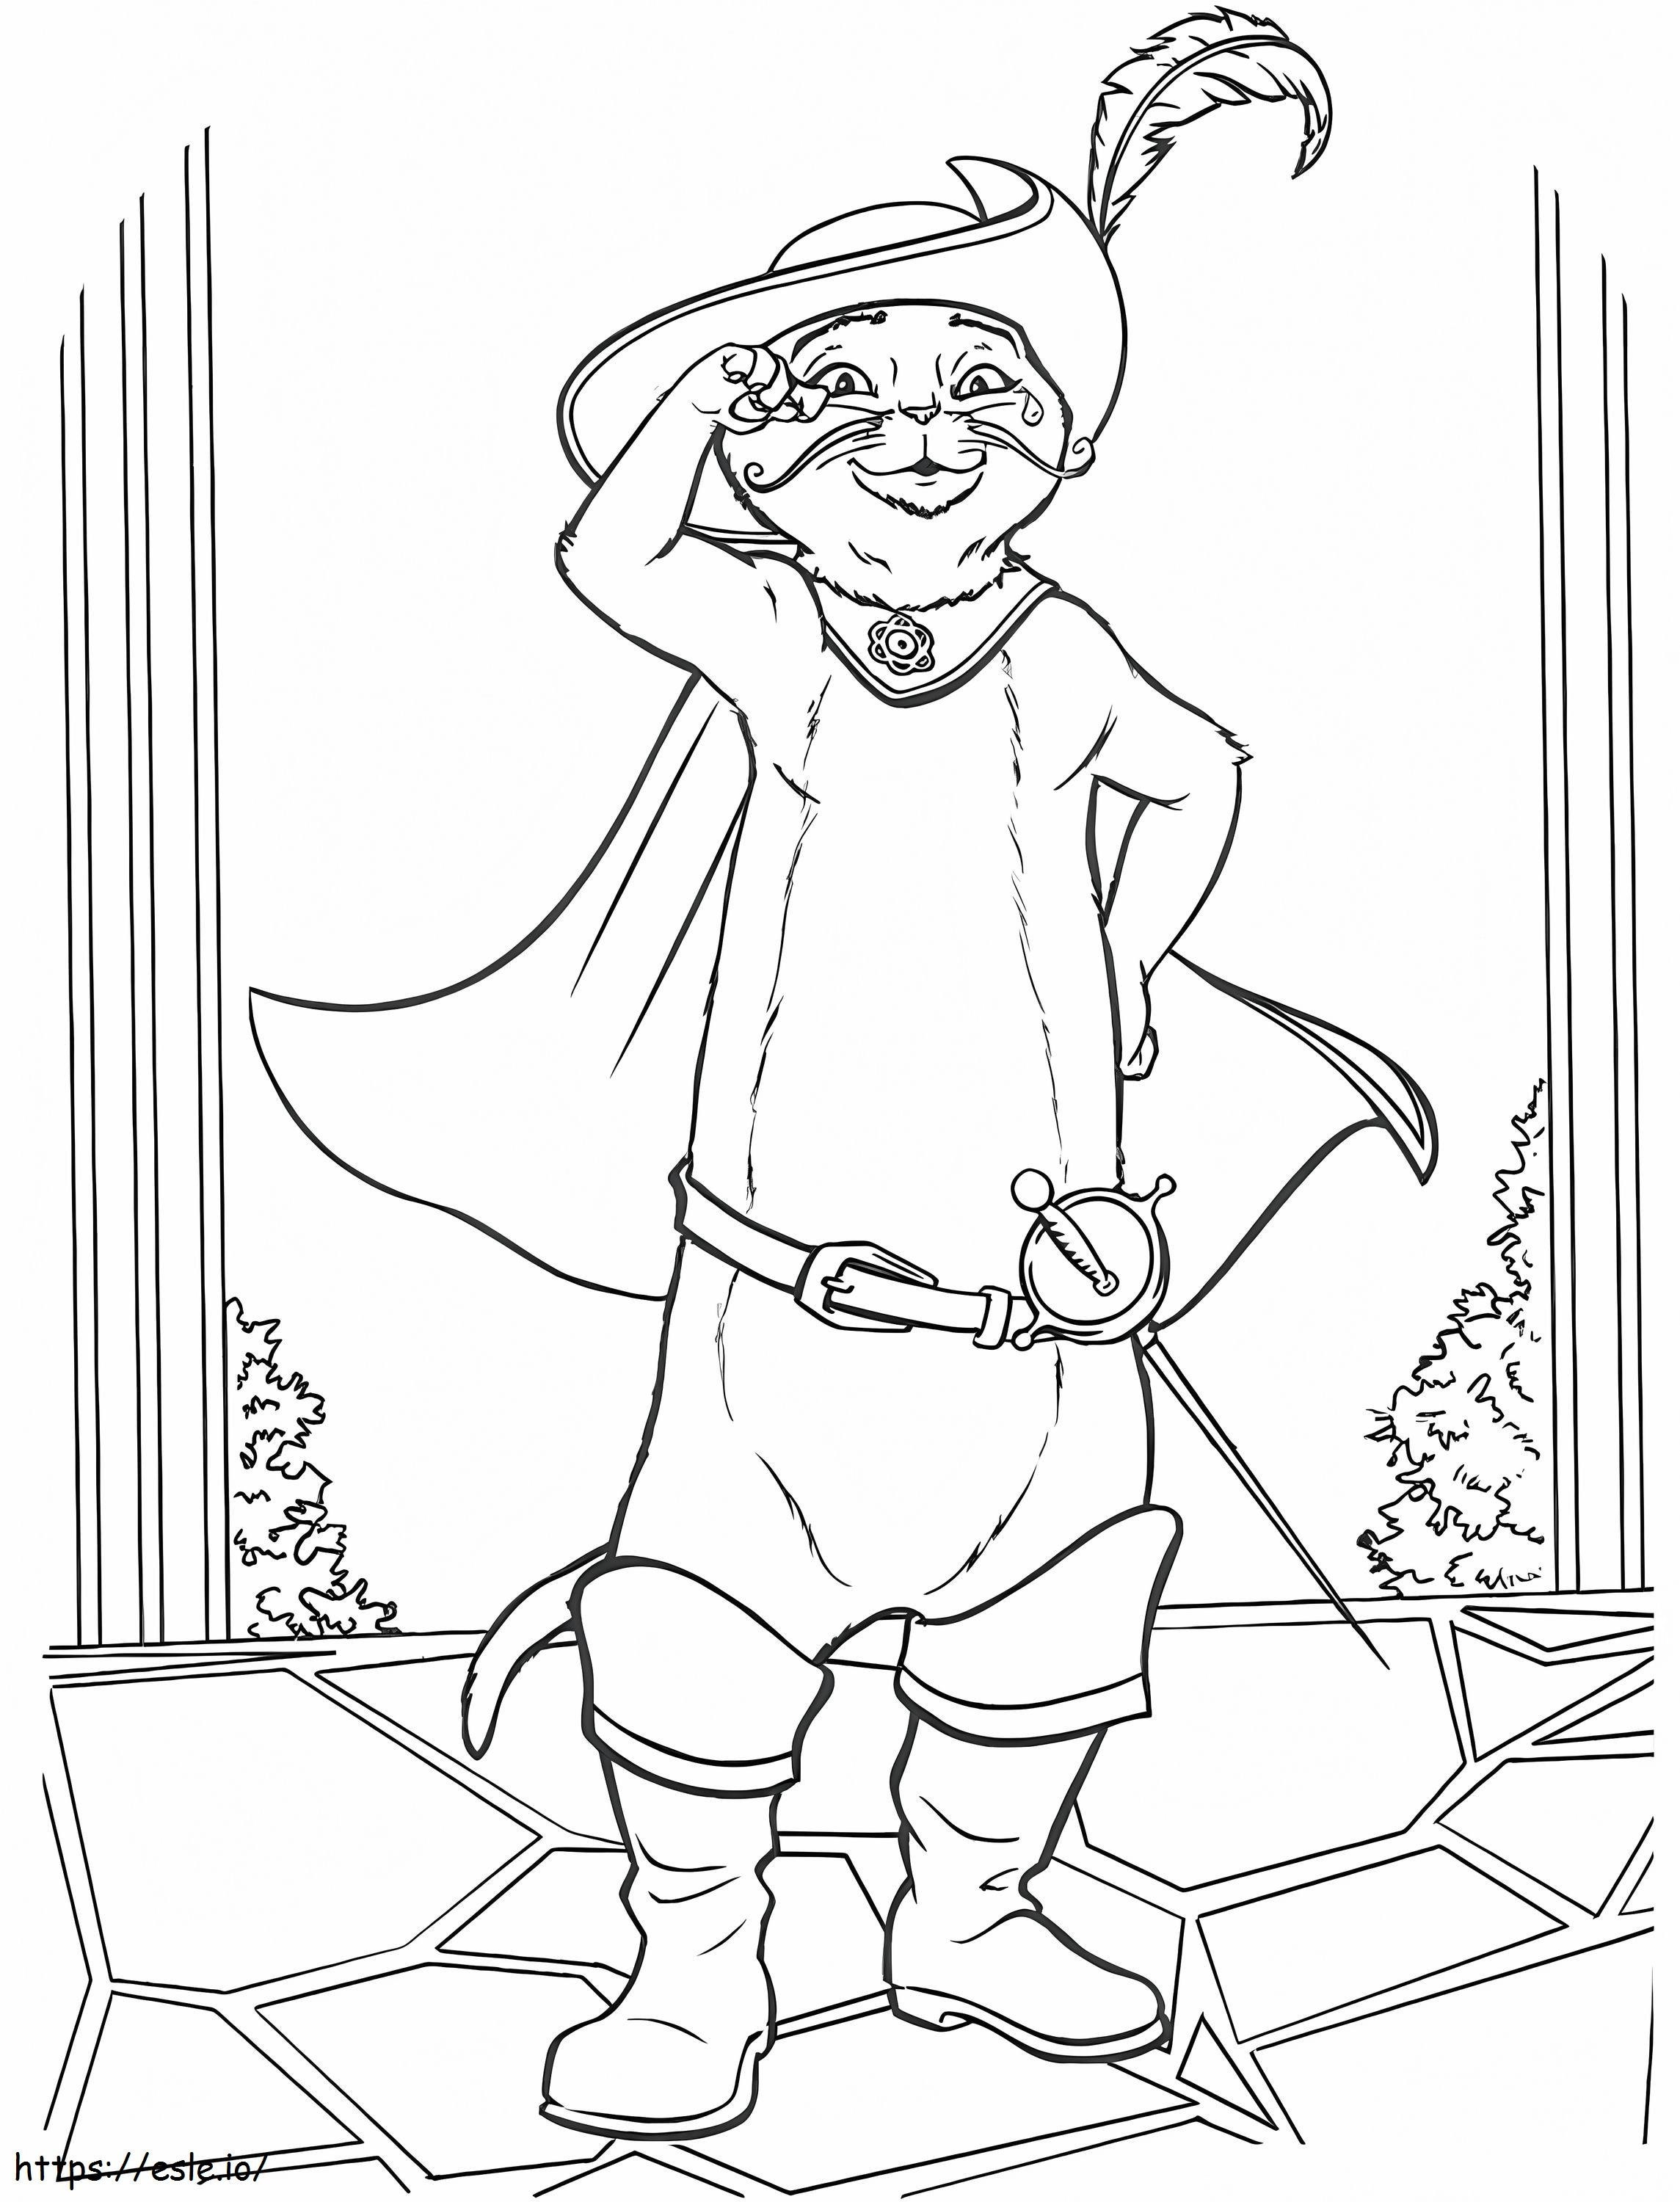 1569077331 Cool Puss In Boots A4 coloring page